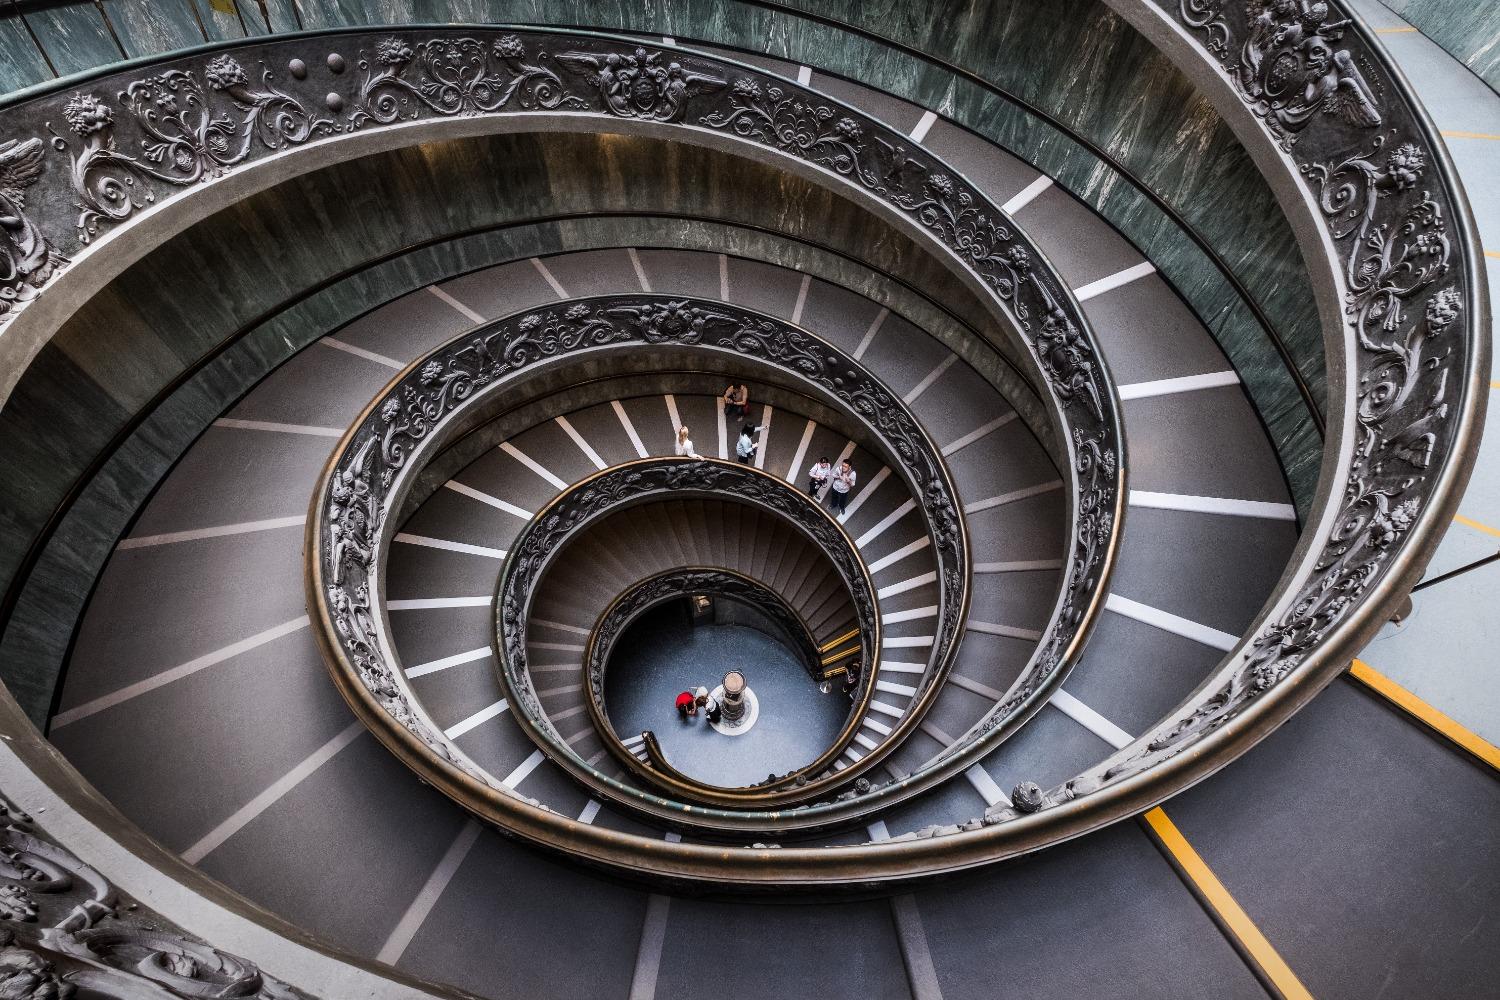 The stairs at the Vatican Museums